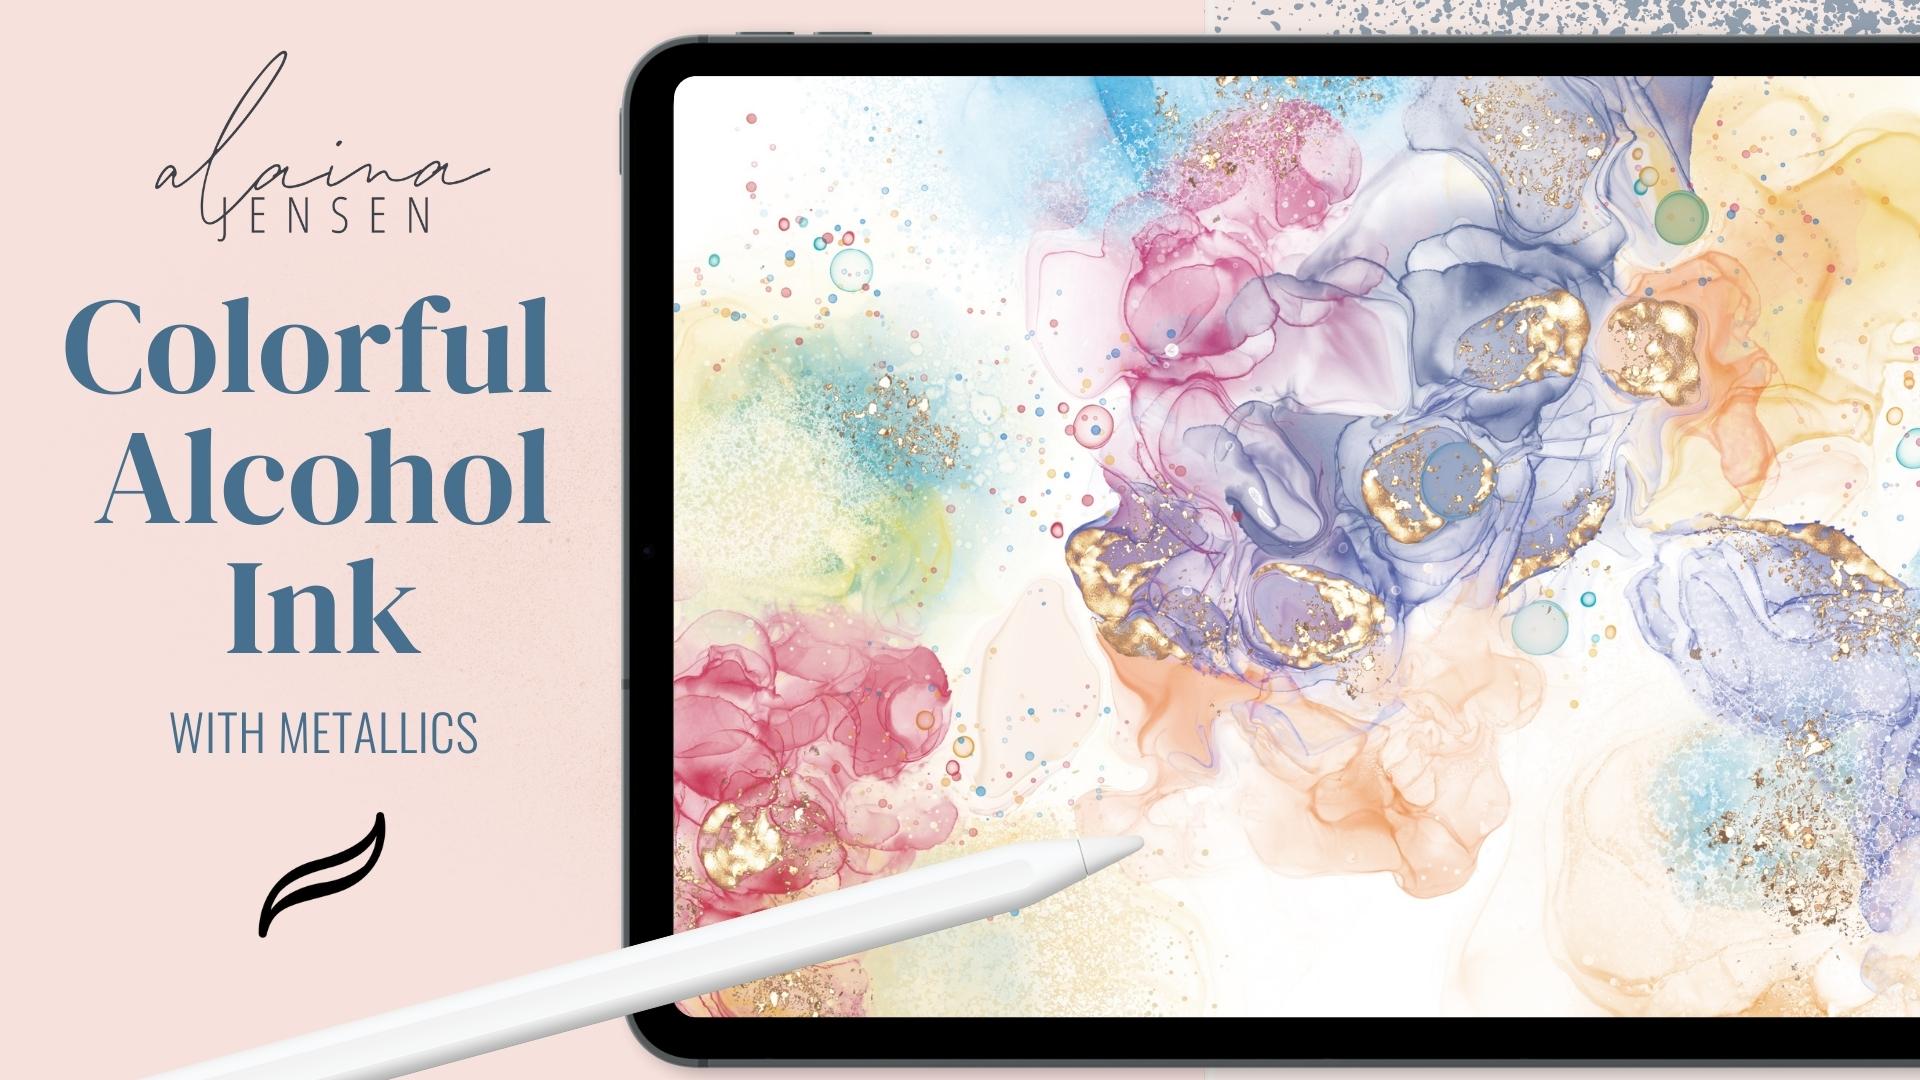 A tutorial video about how to create digital alcohol ink on an ipad